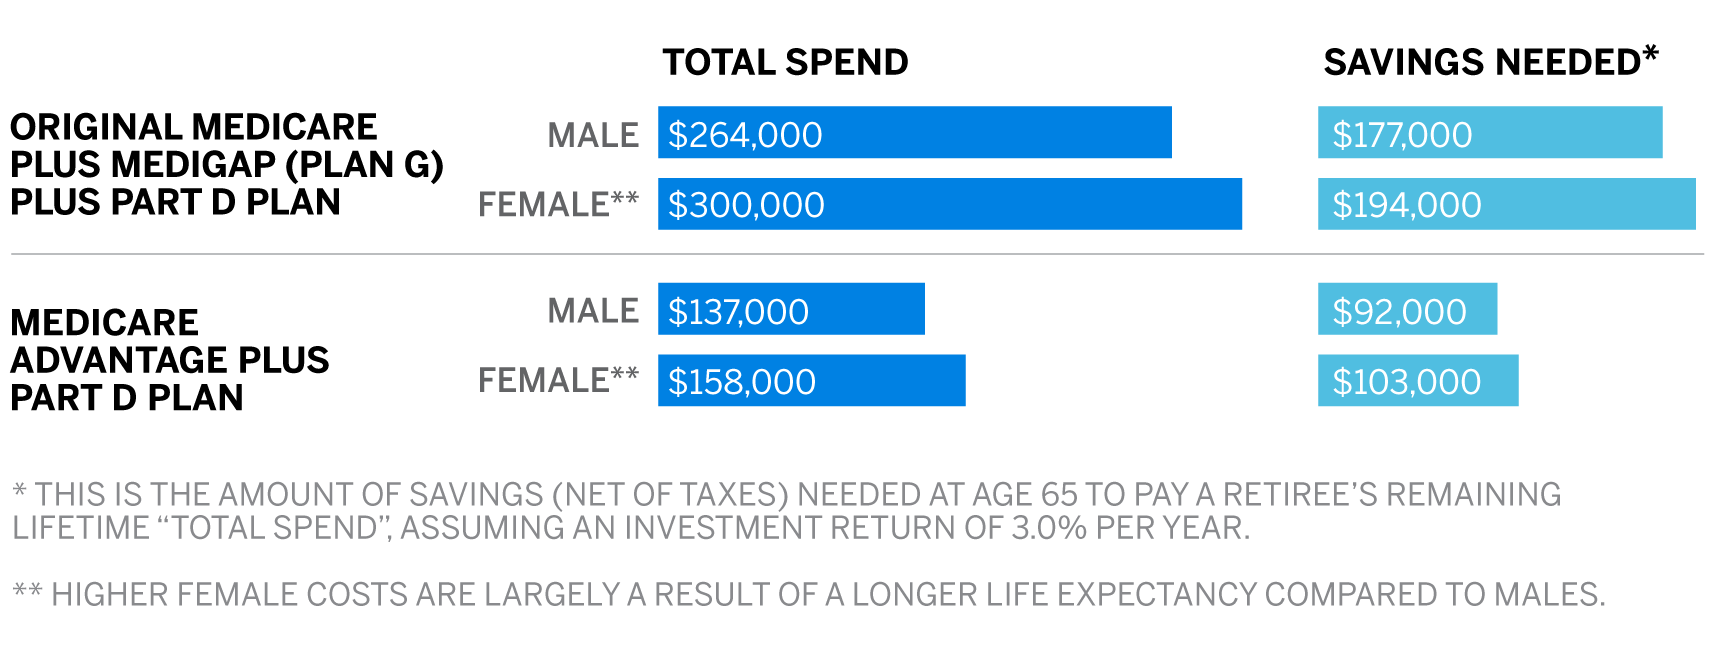 Figure 1: Projected Remaining Lifetime Healthcare Expenses for a Healthy 65-Year-Old Retiring in 2022